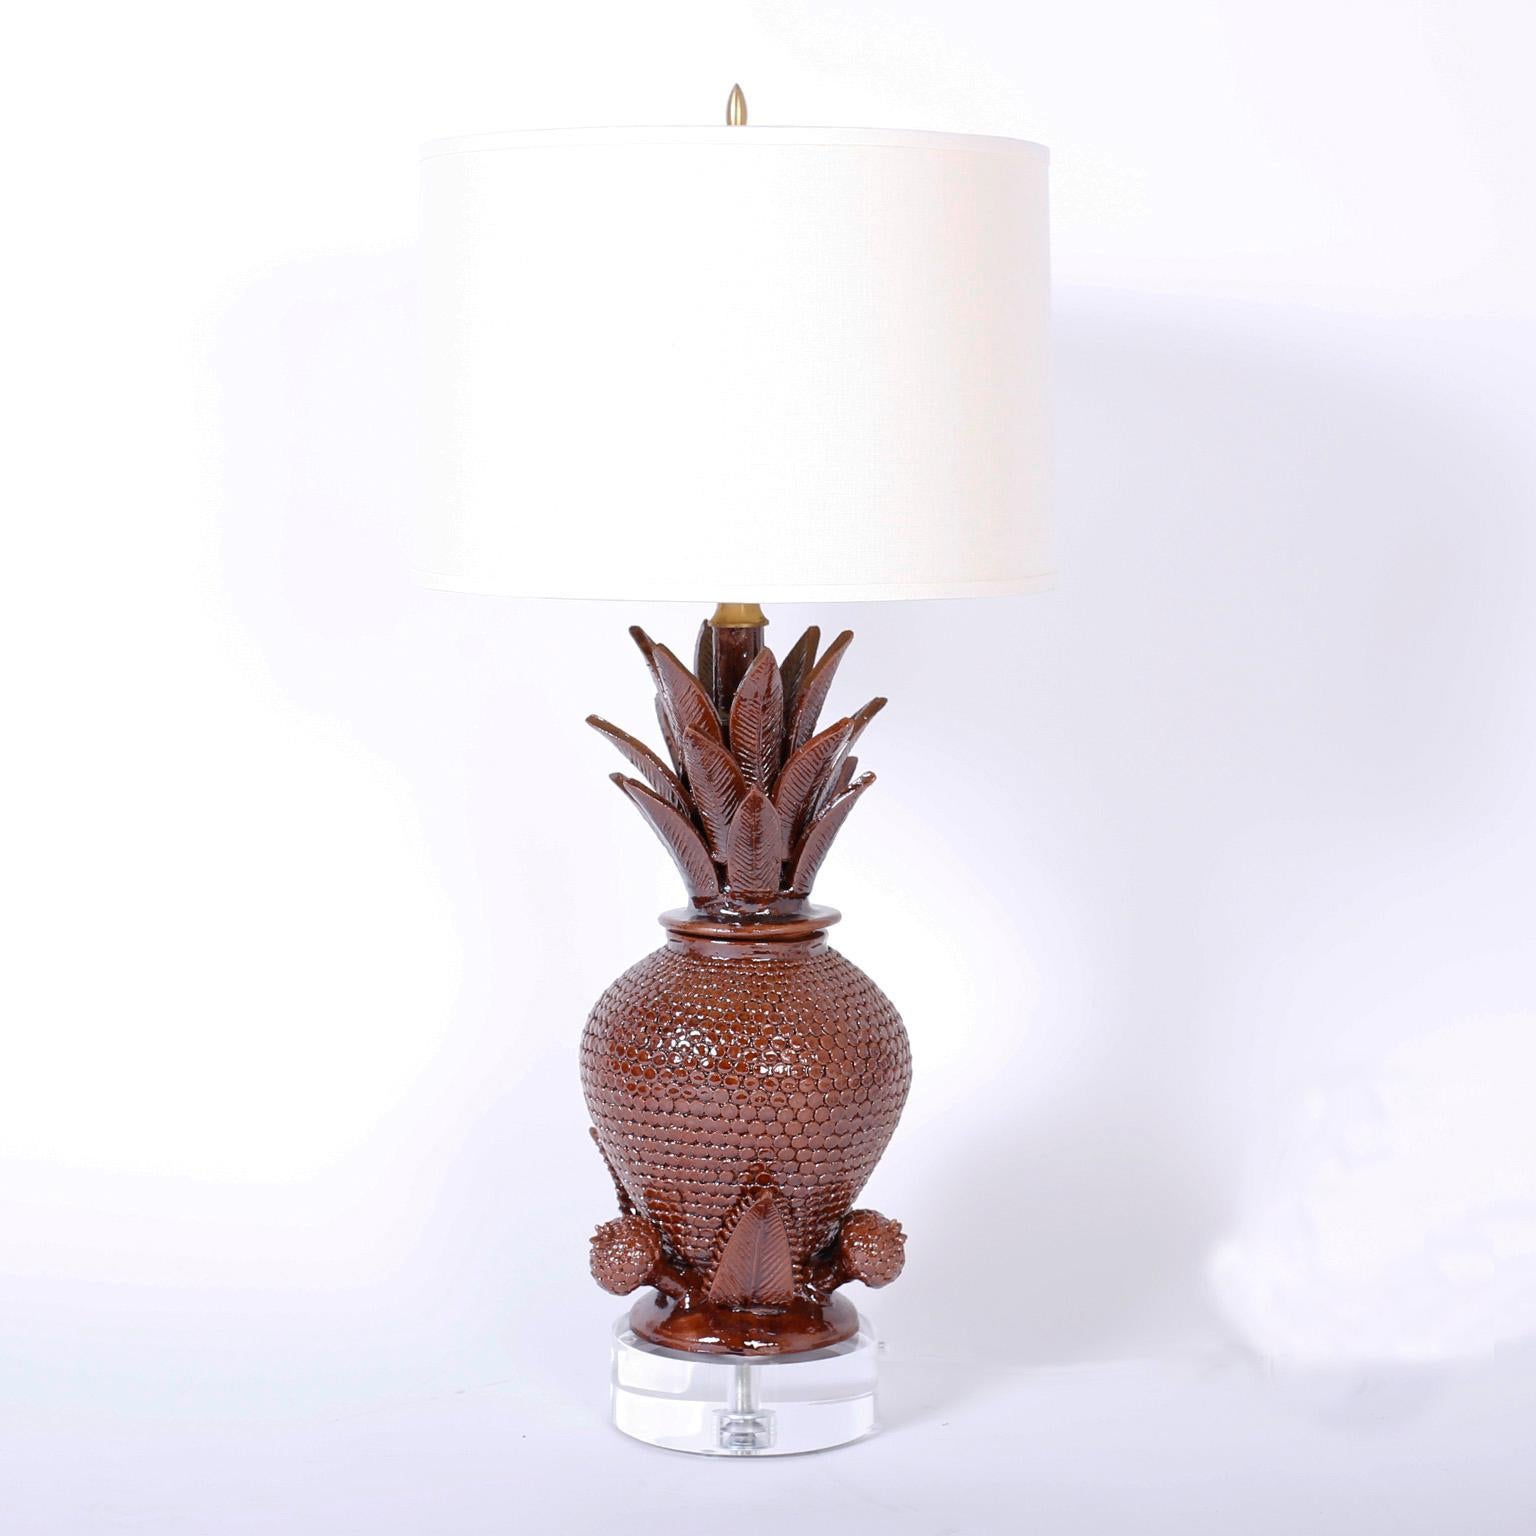 Impressive pair of brown glazed terra cotta table lamps with an ingenious display of pottery prowess in the form of these stylized pineapples, presented on thick Lucite bases.